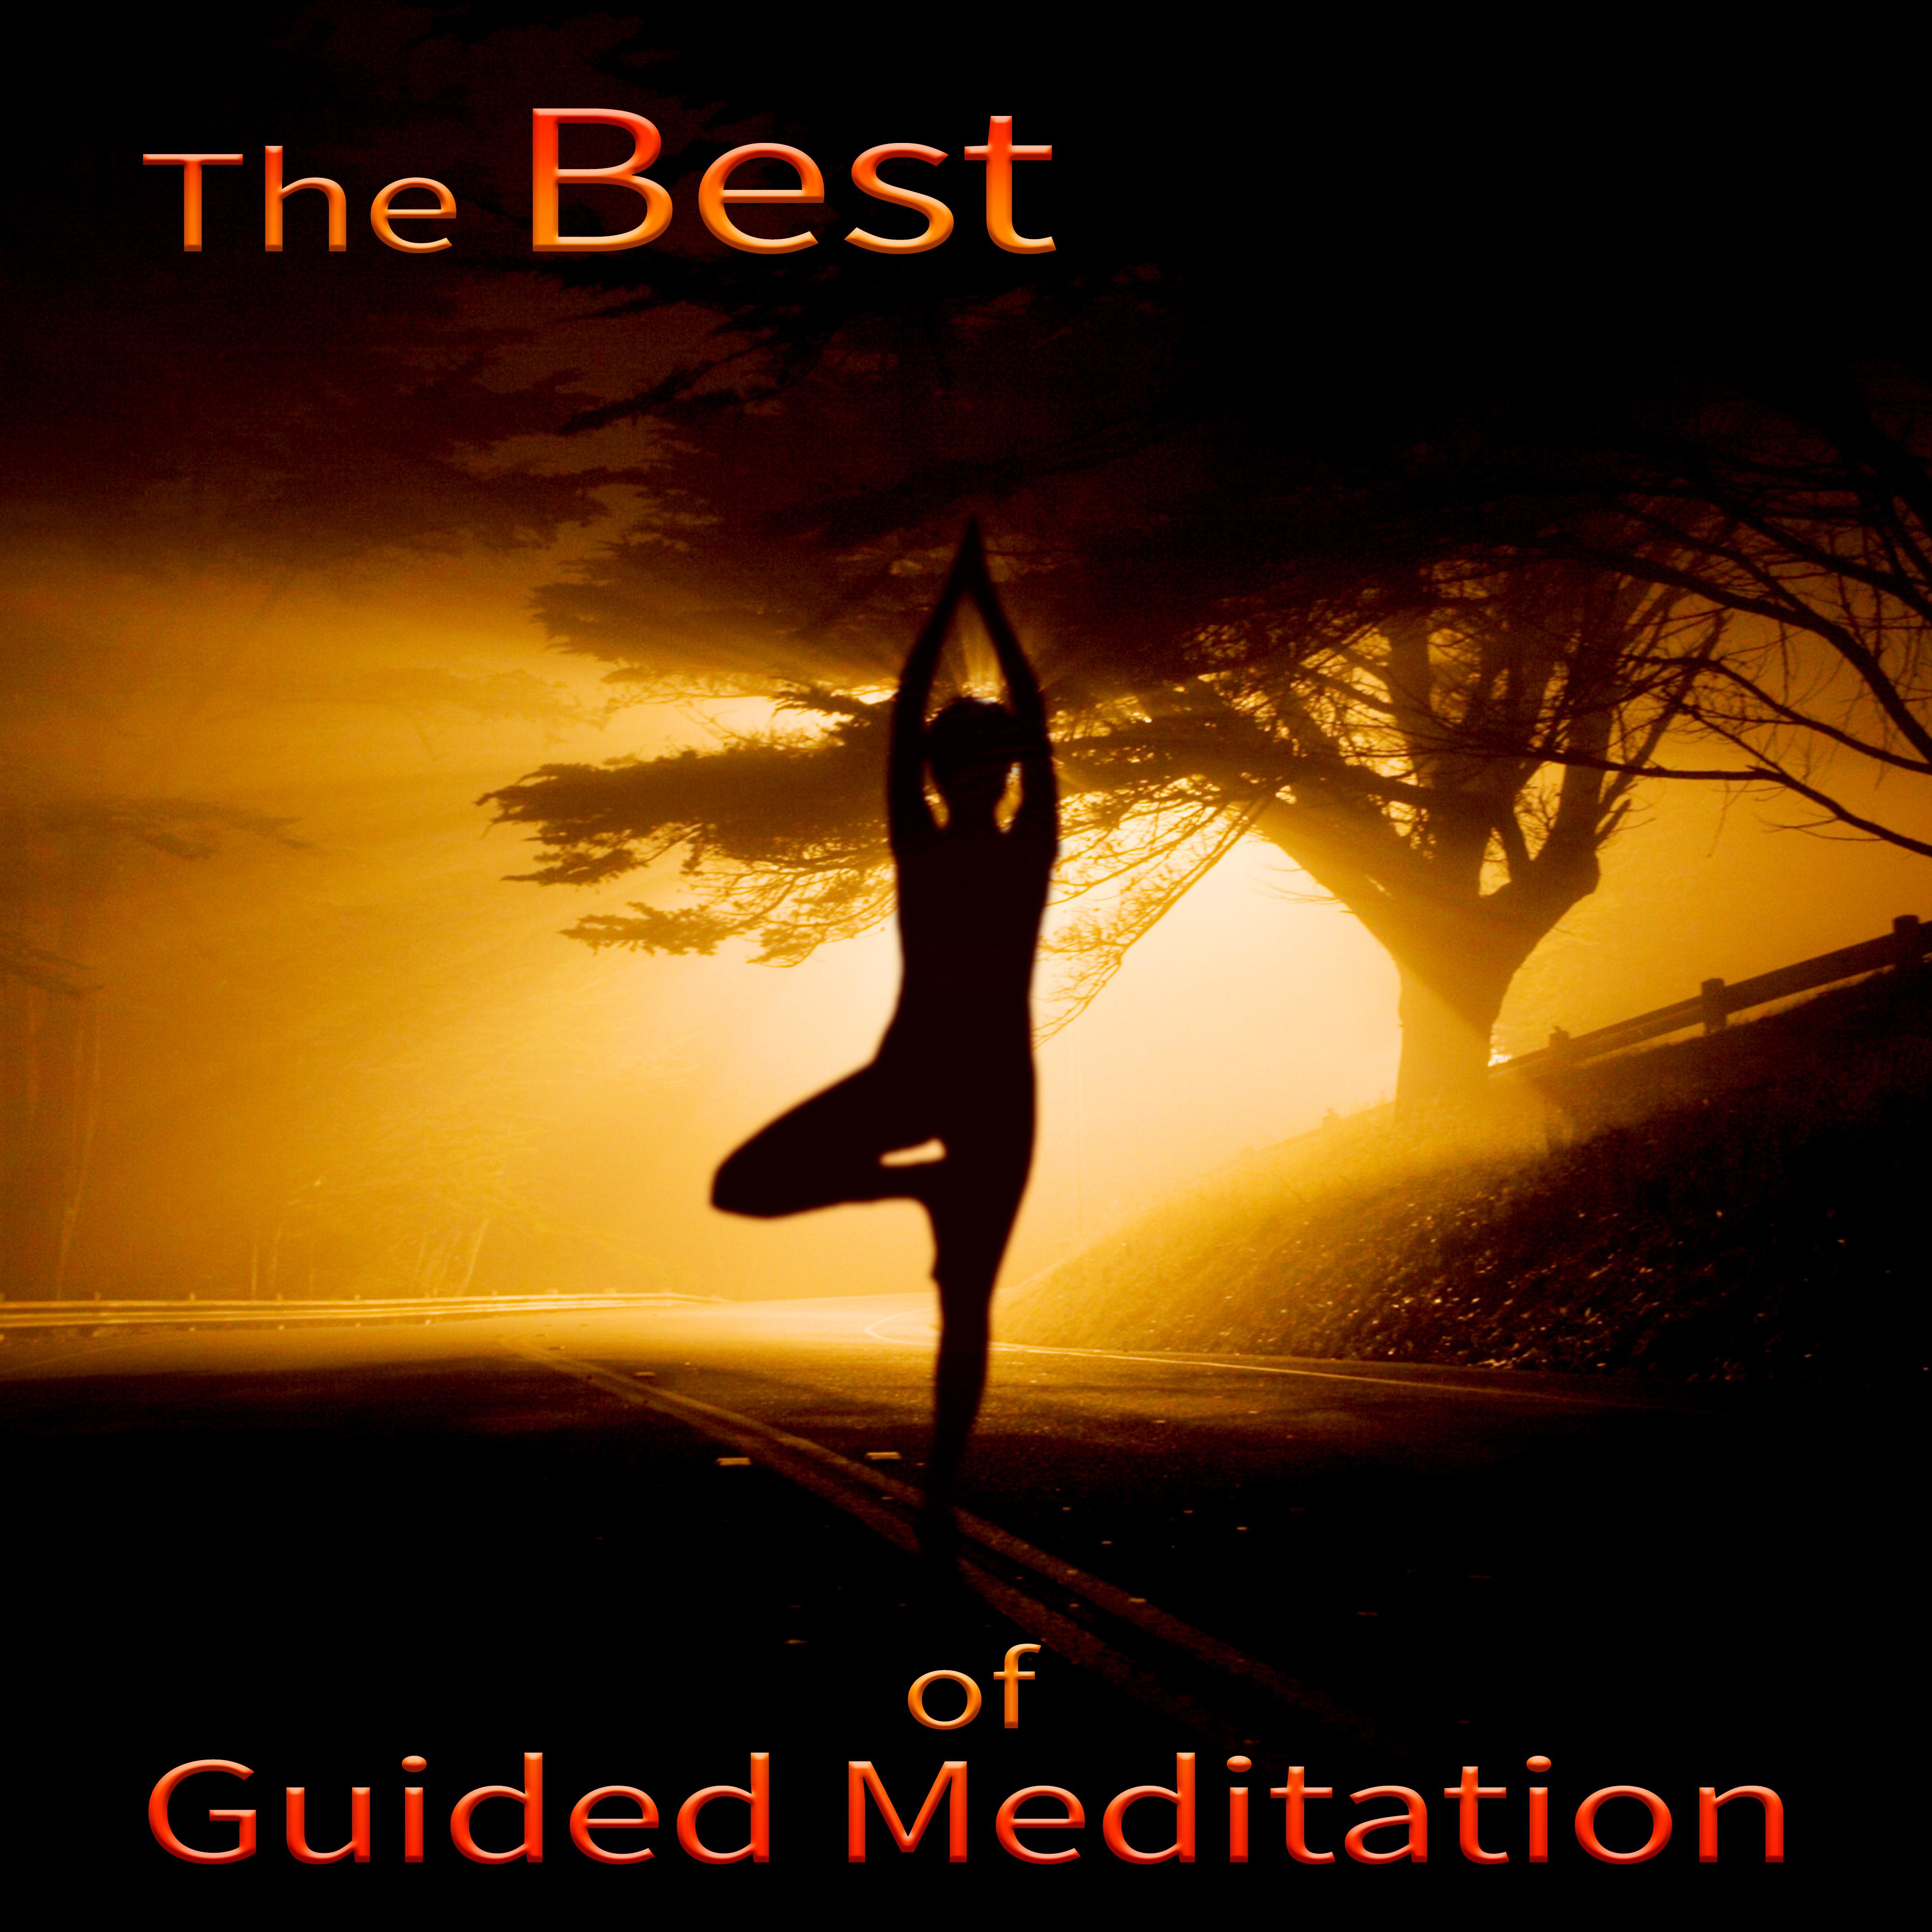 The Best of Guided Meditation